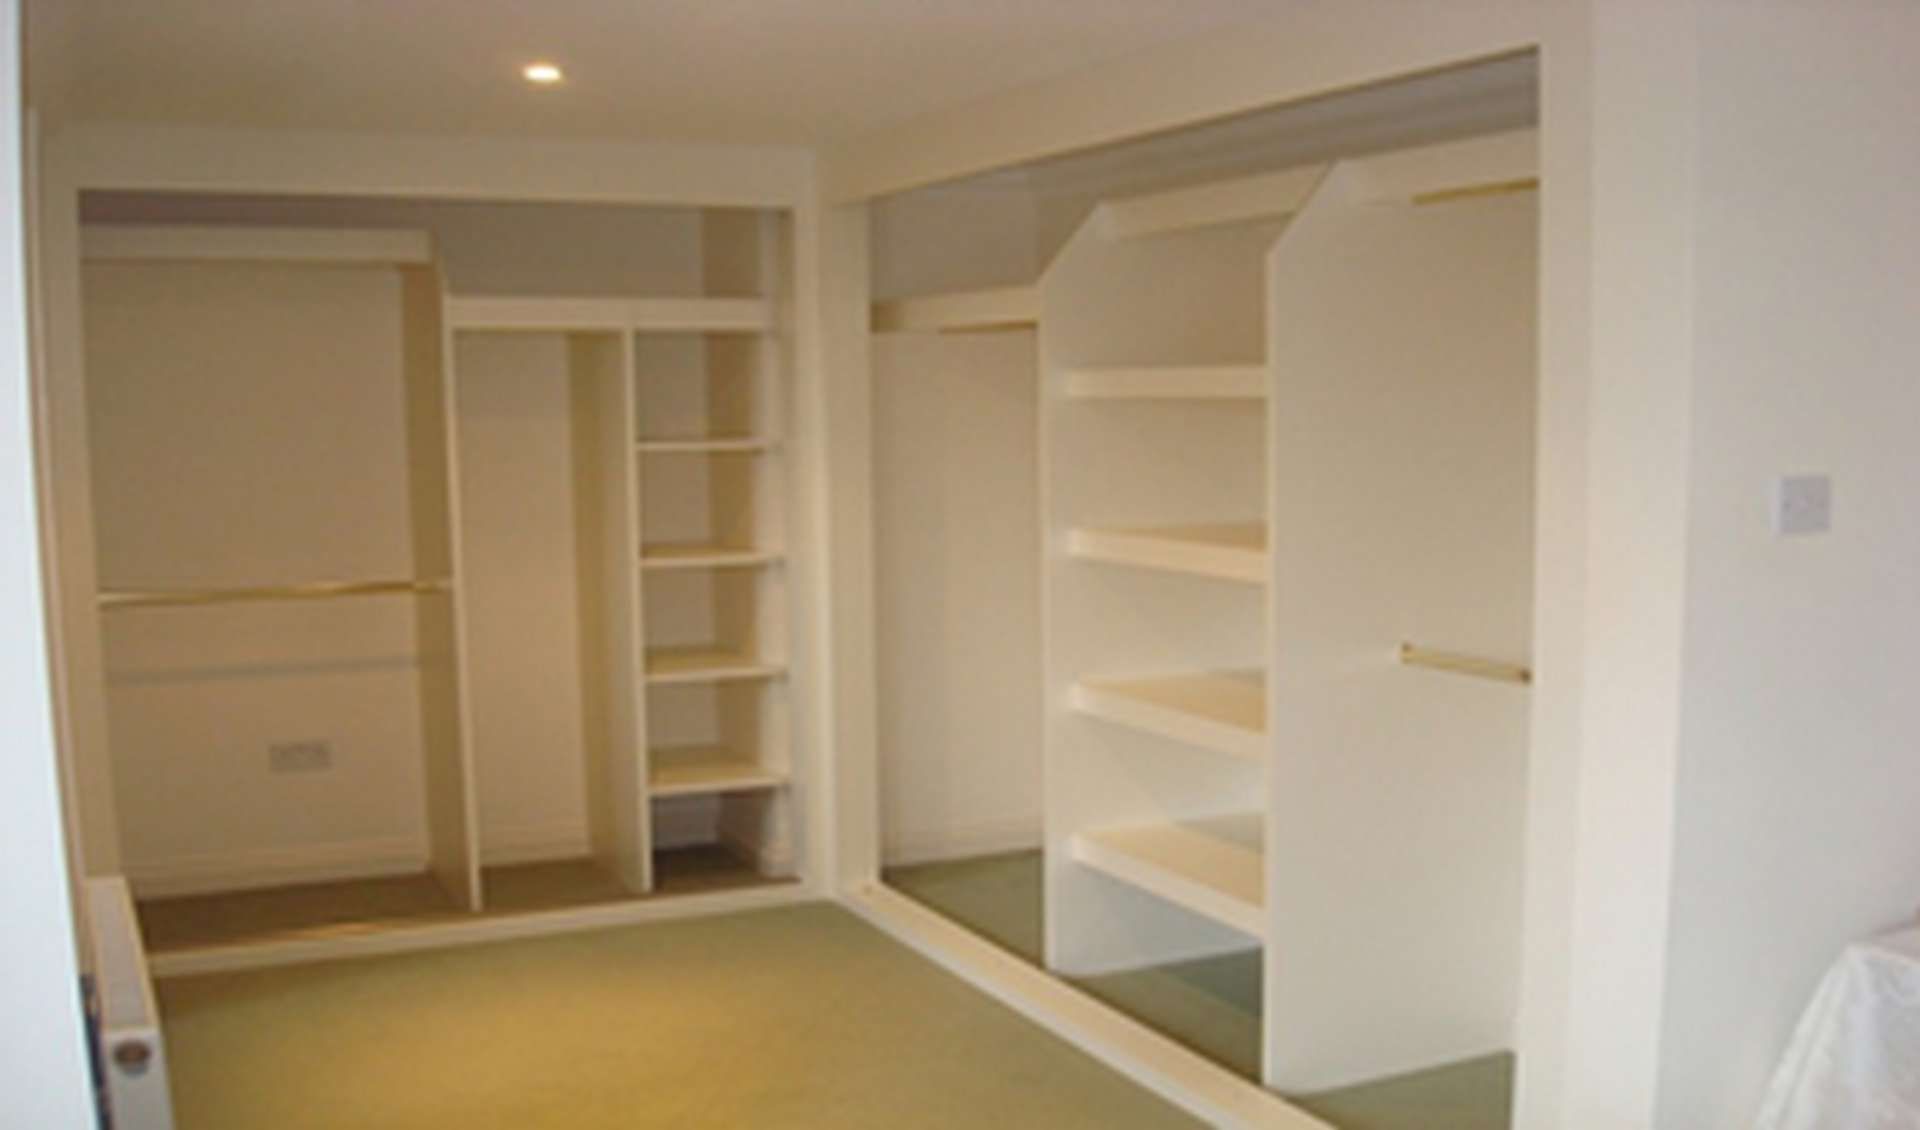 Fitted Storage Solutions | Fitted Bedroom Storage Ideas Custom World Pertaining To Bedroom Wardrobes Storages (View 13 of 20)